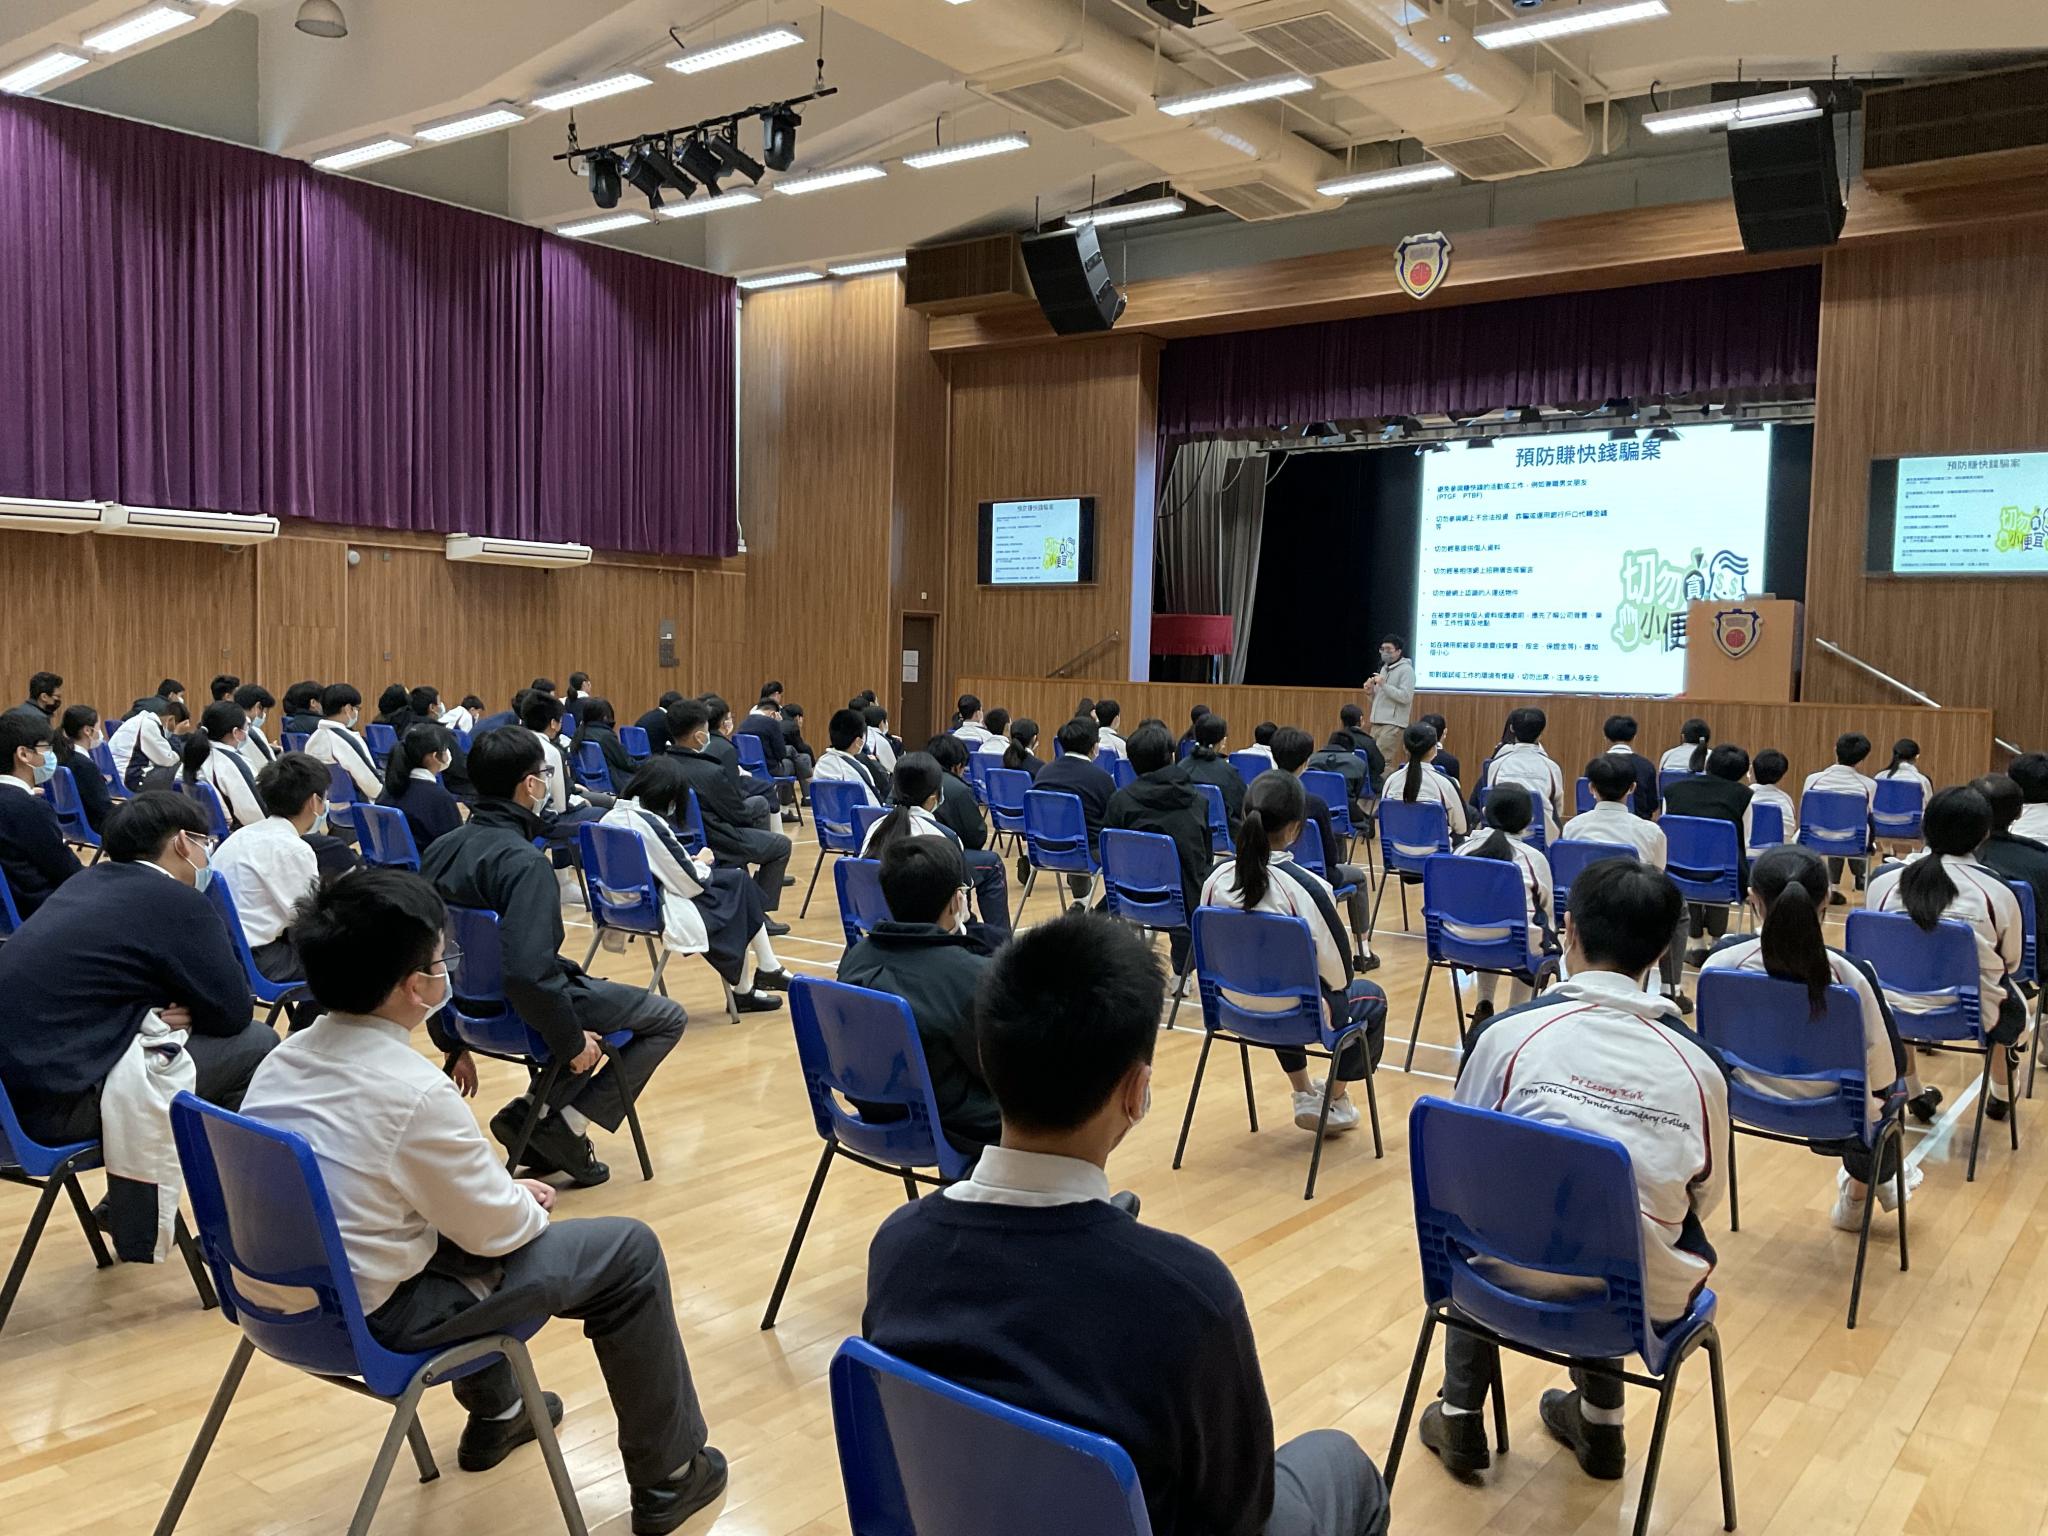 The talk was held in the school hall with epidemic prevention measures.